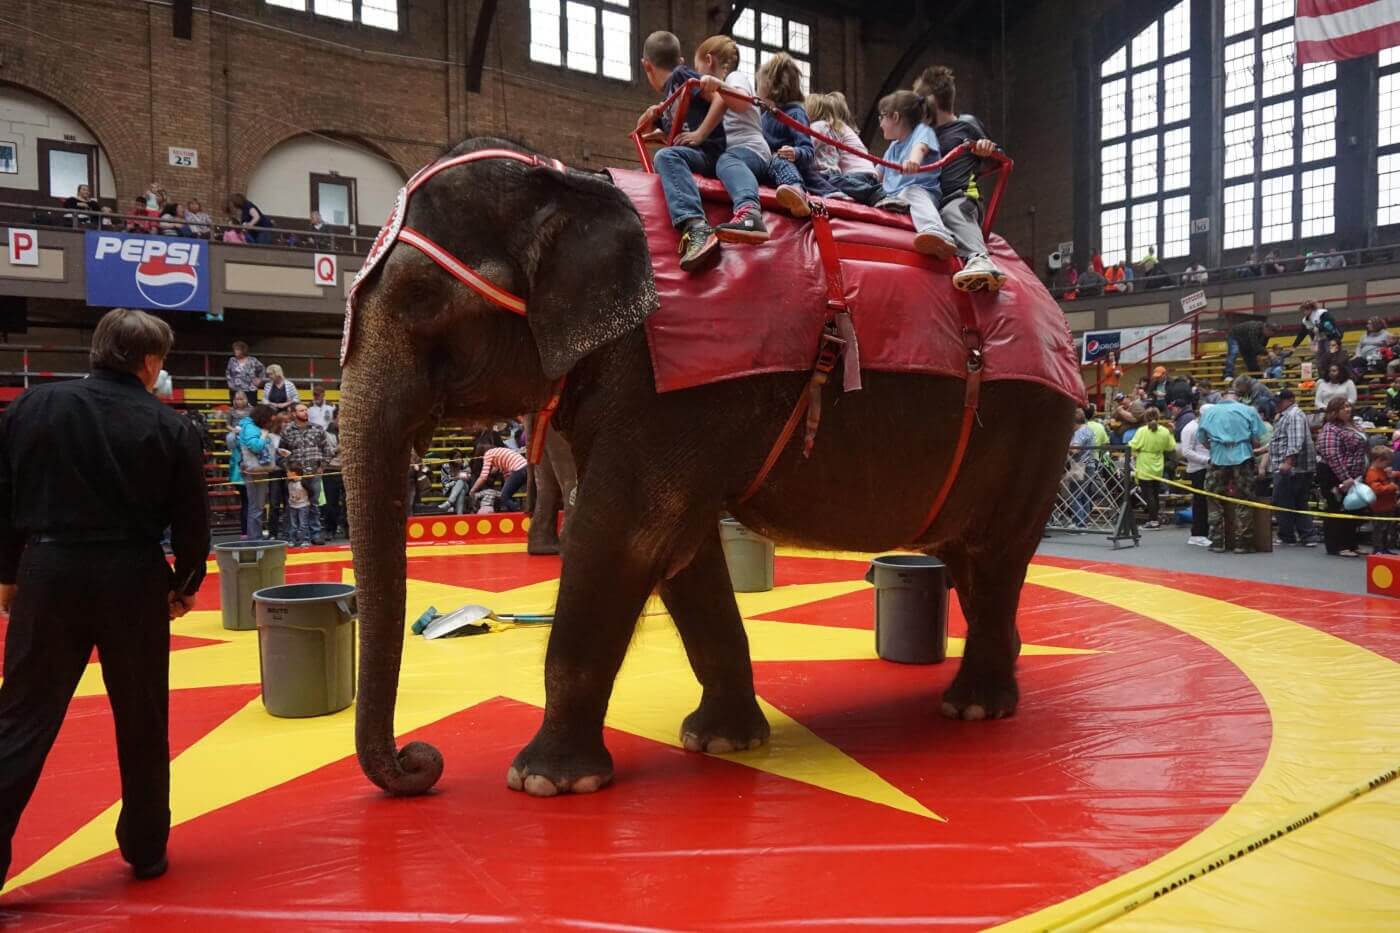 Polyram Plastic Industries to Cut Ties With Hadi Shrine’s Abusive Circus After Push From PETA